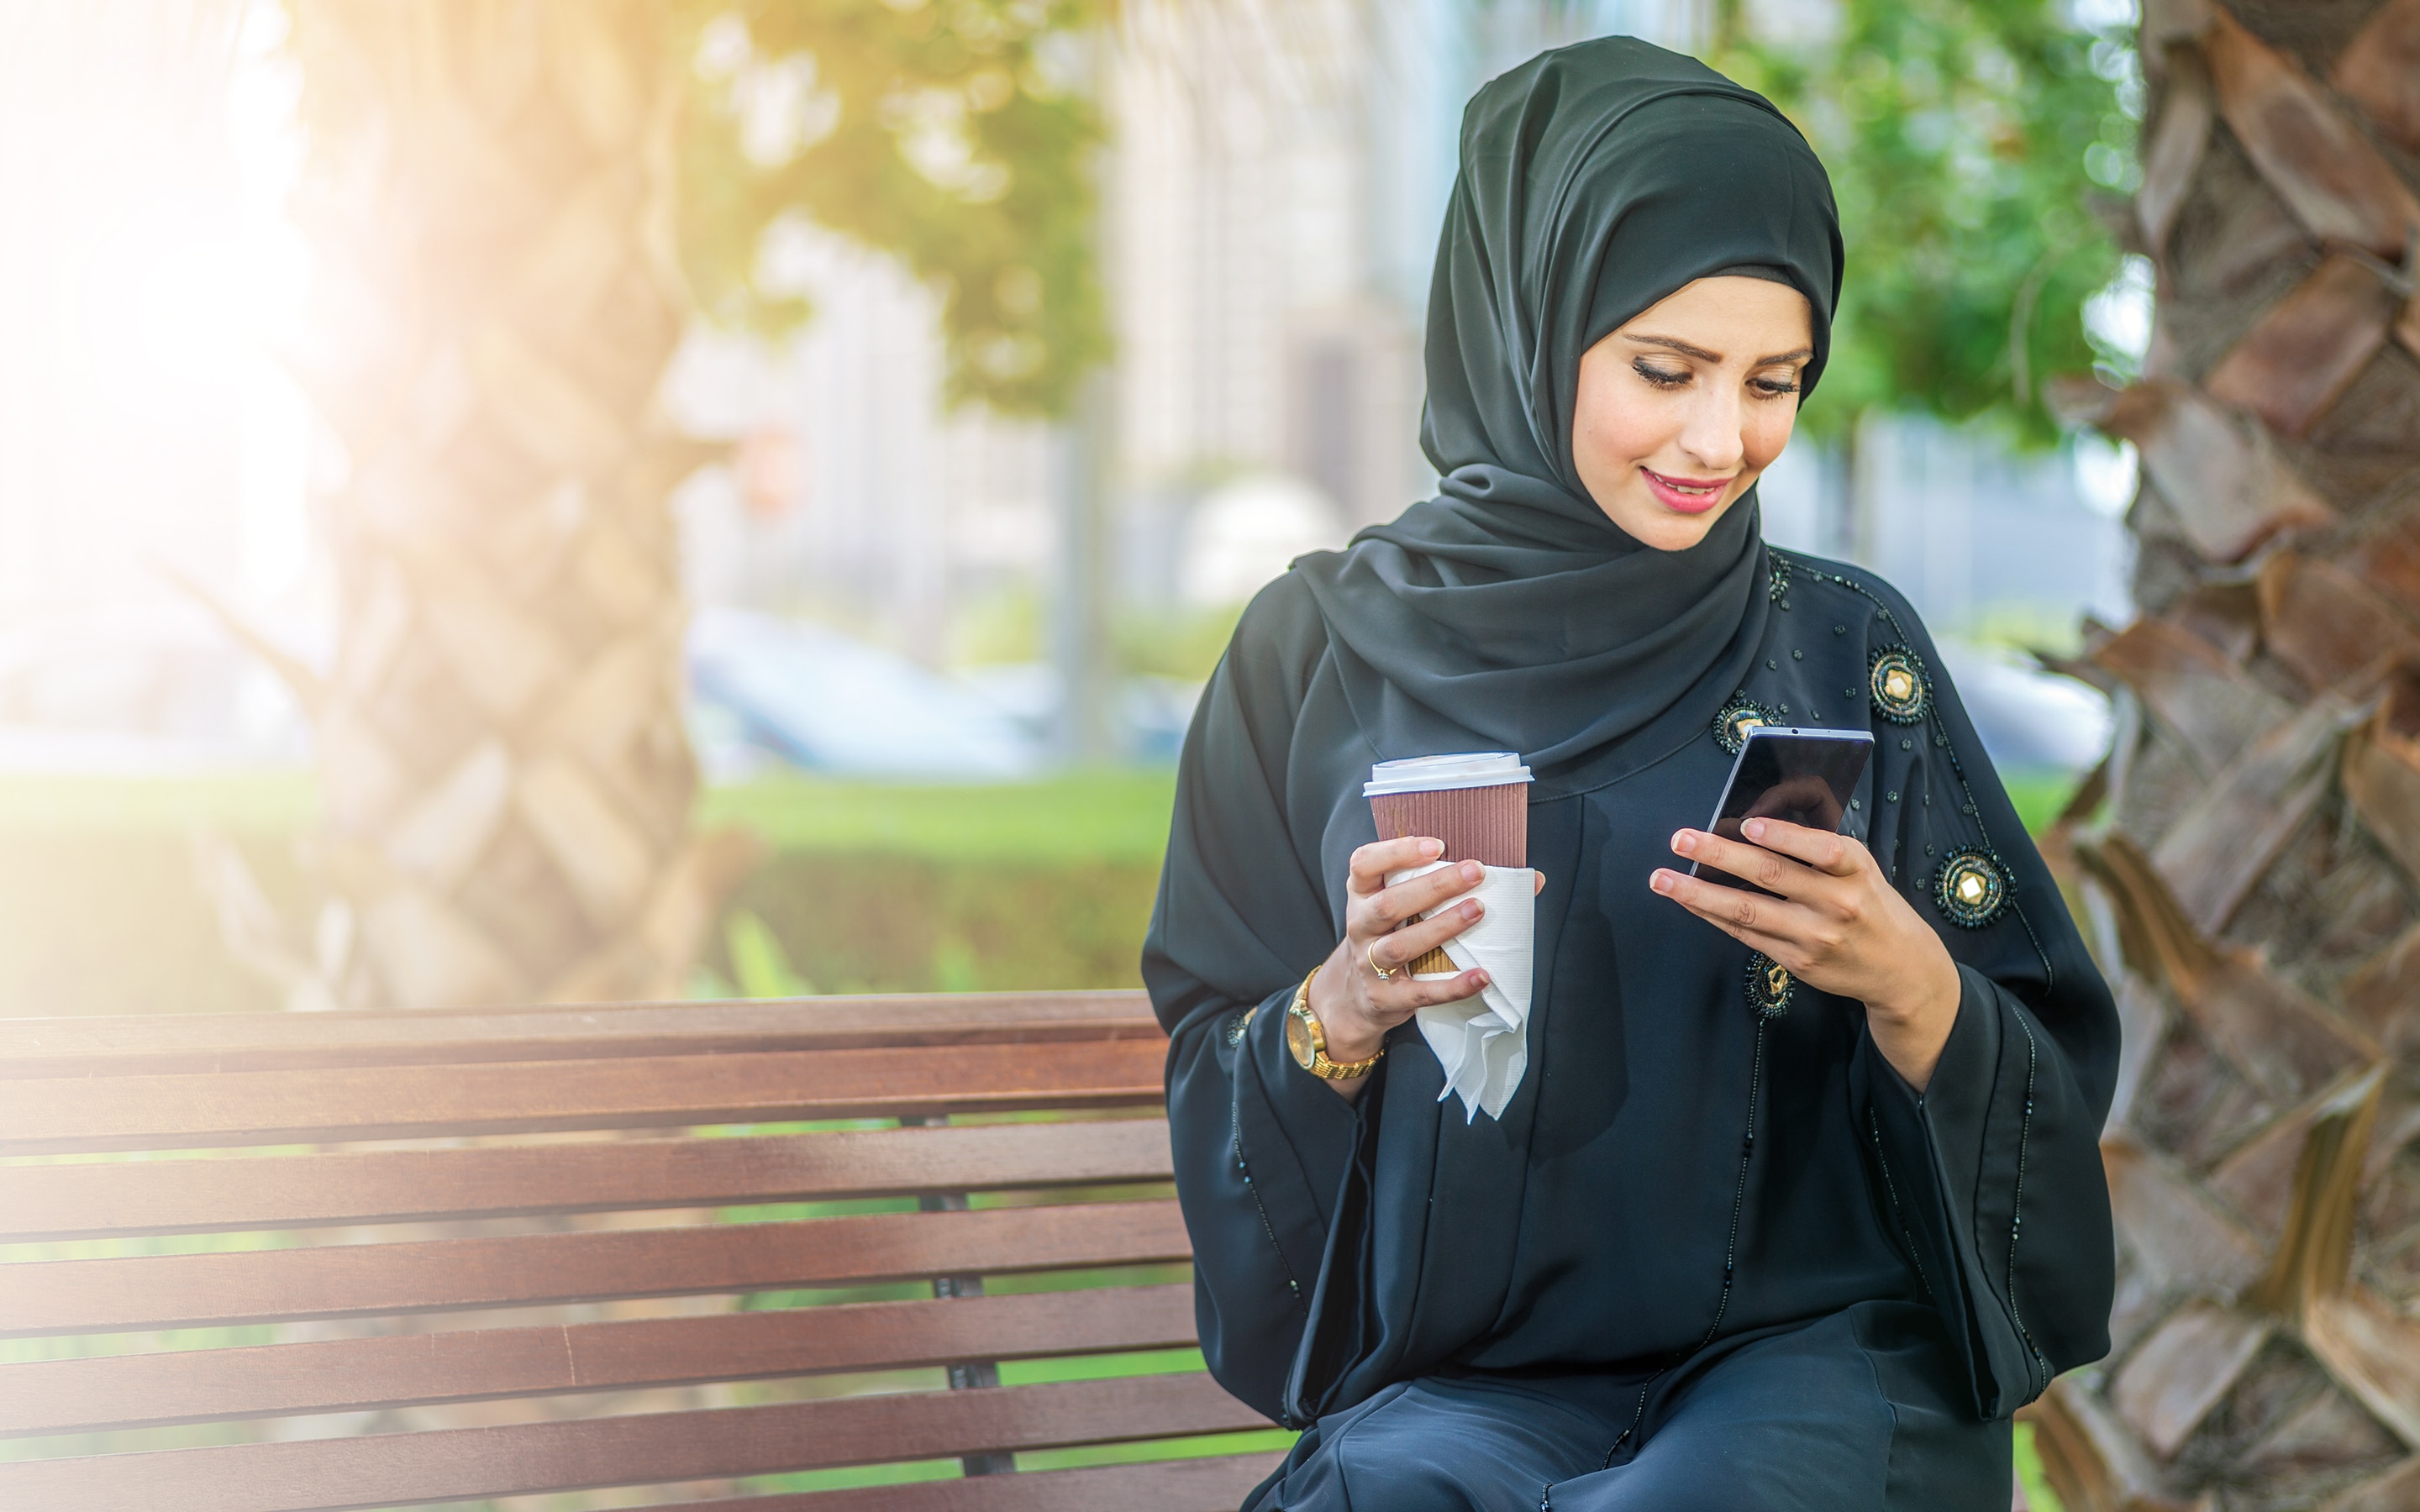  Arab businesswomen in hijab holding coffee outdoors and reading a message on a cell phone and looking at the camera.